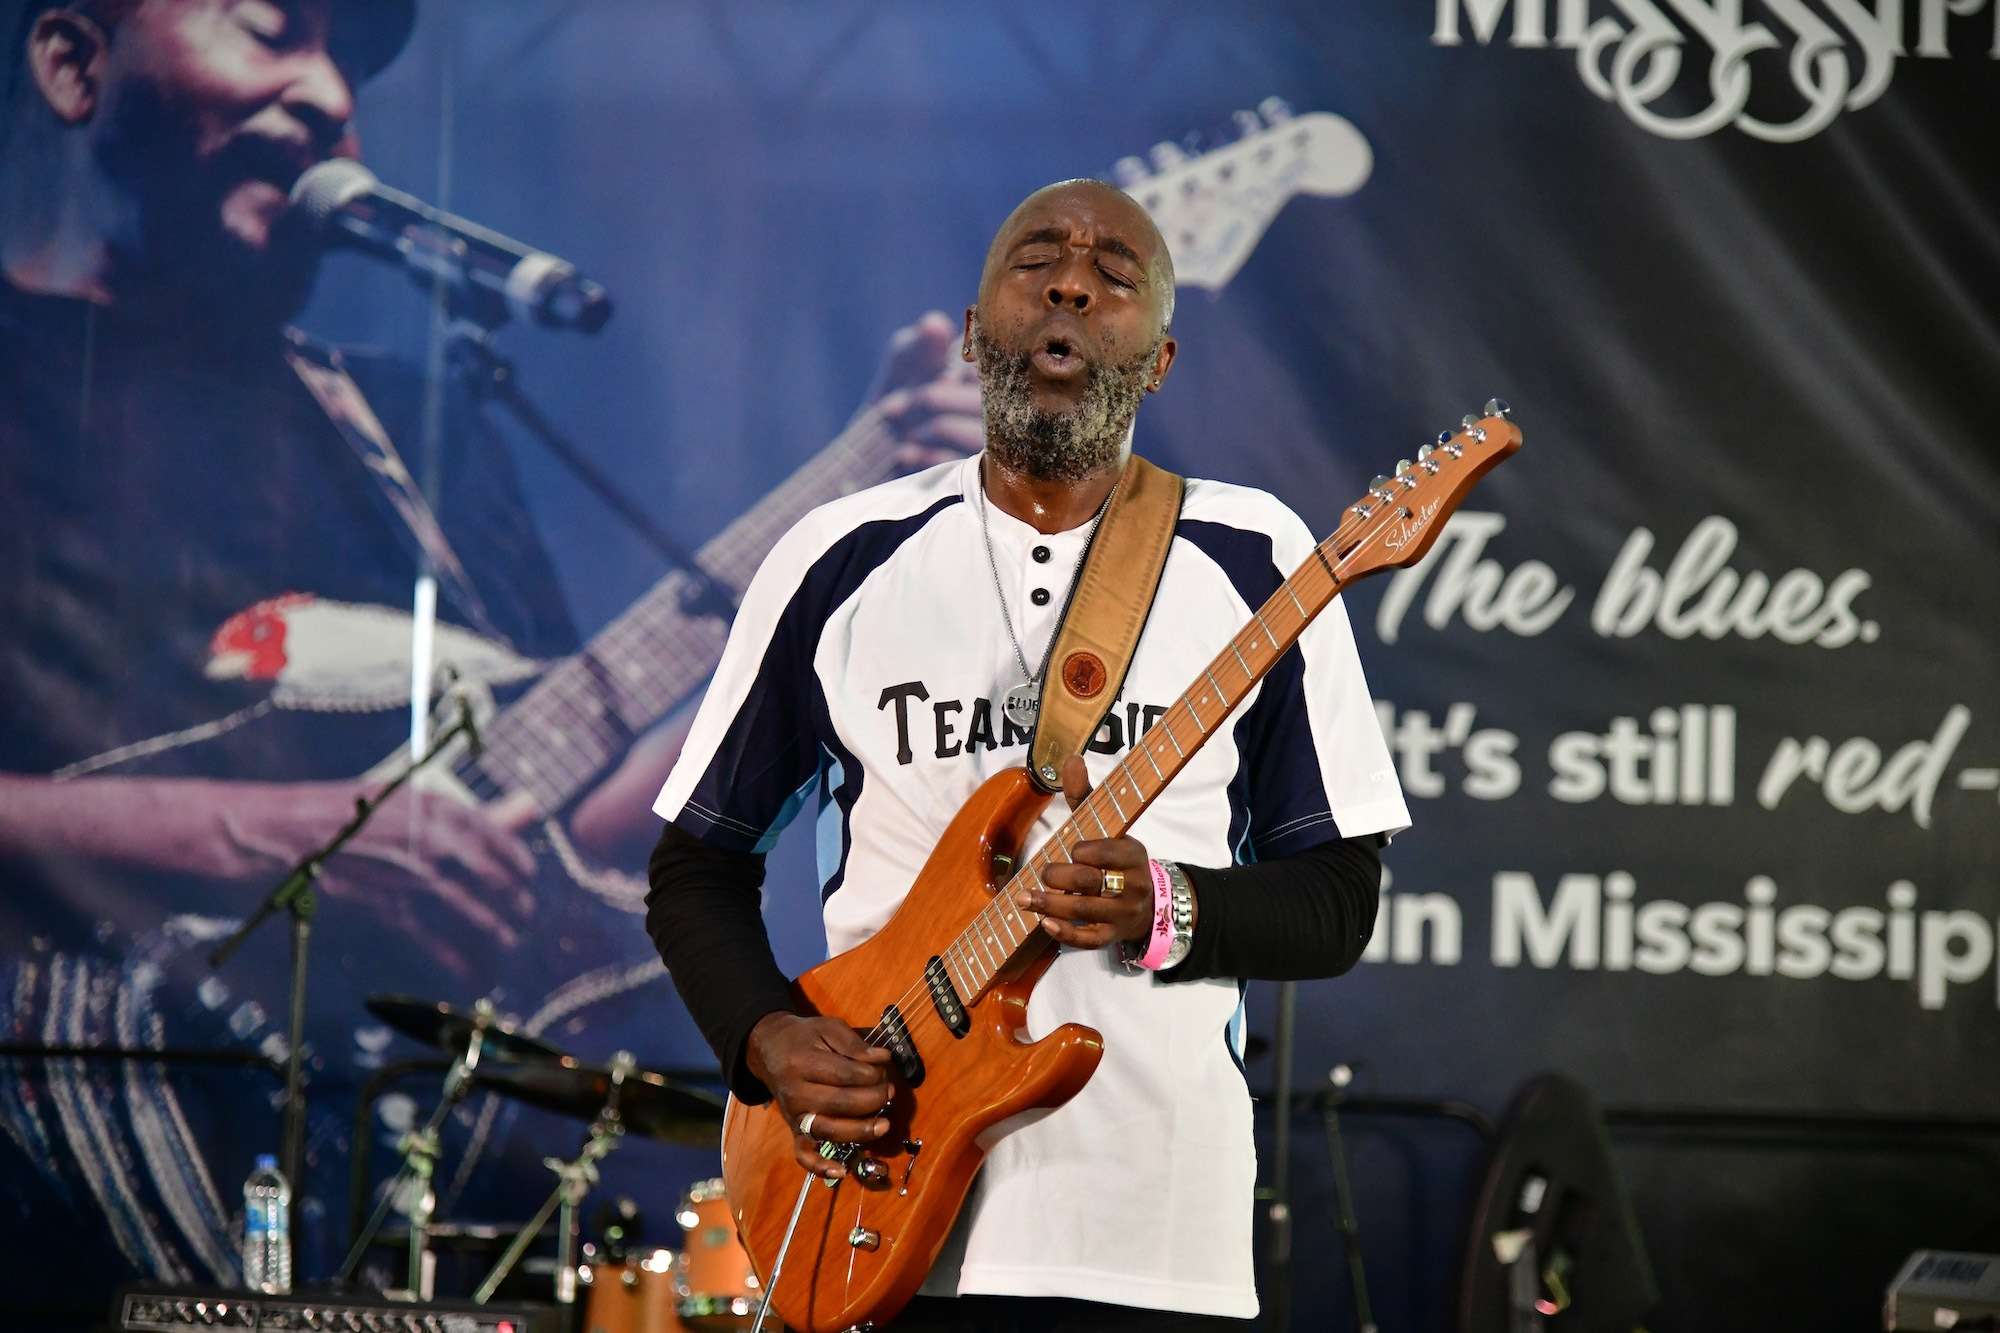 Mr Sipp Live At Chicago Blues Fest [GALLERY] 9